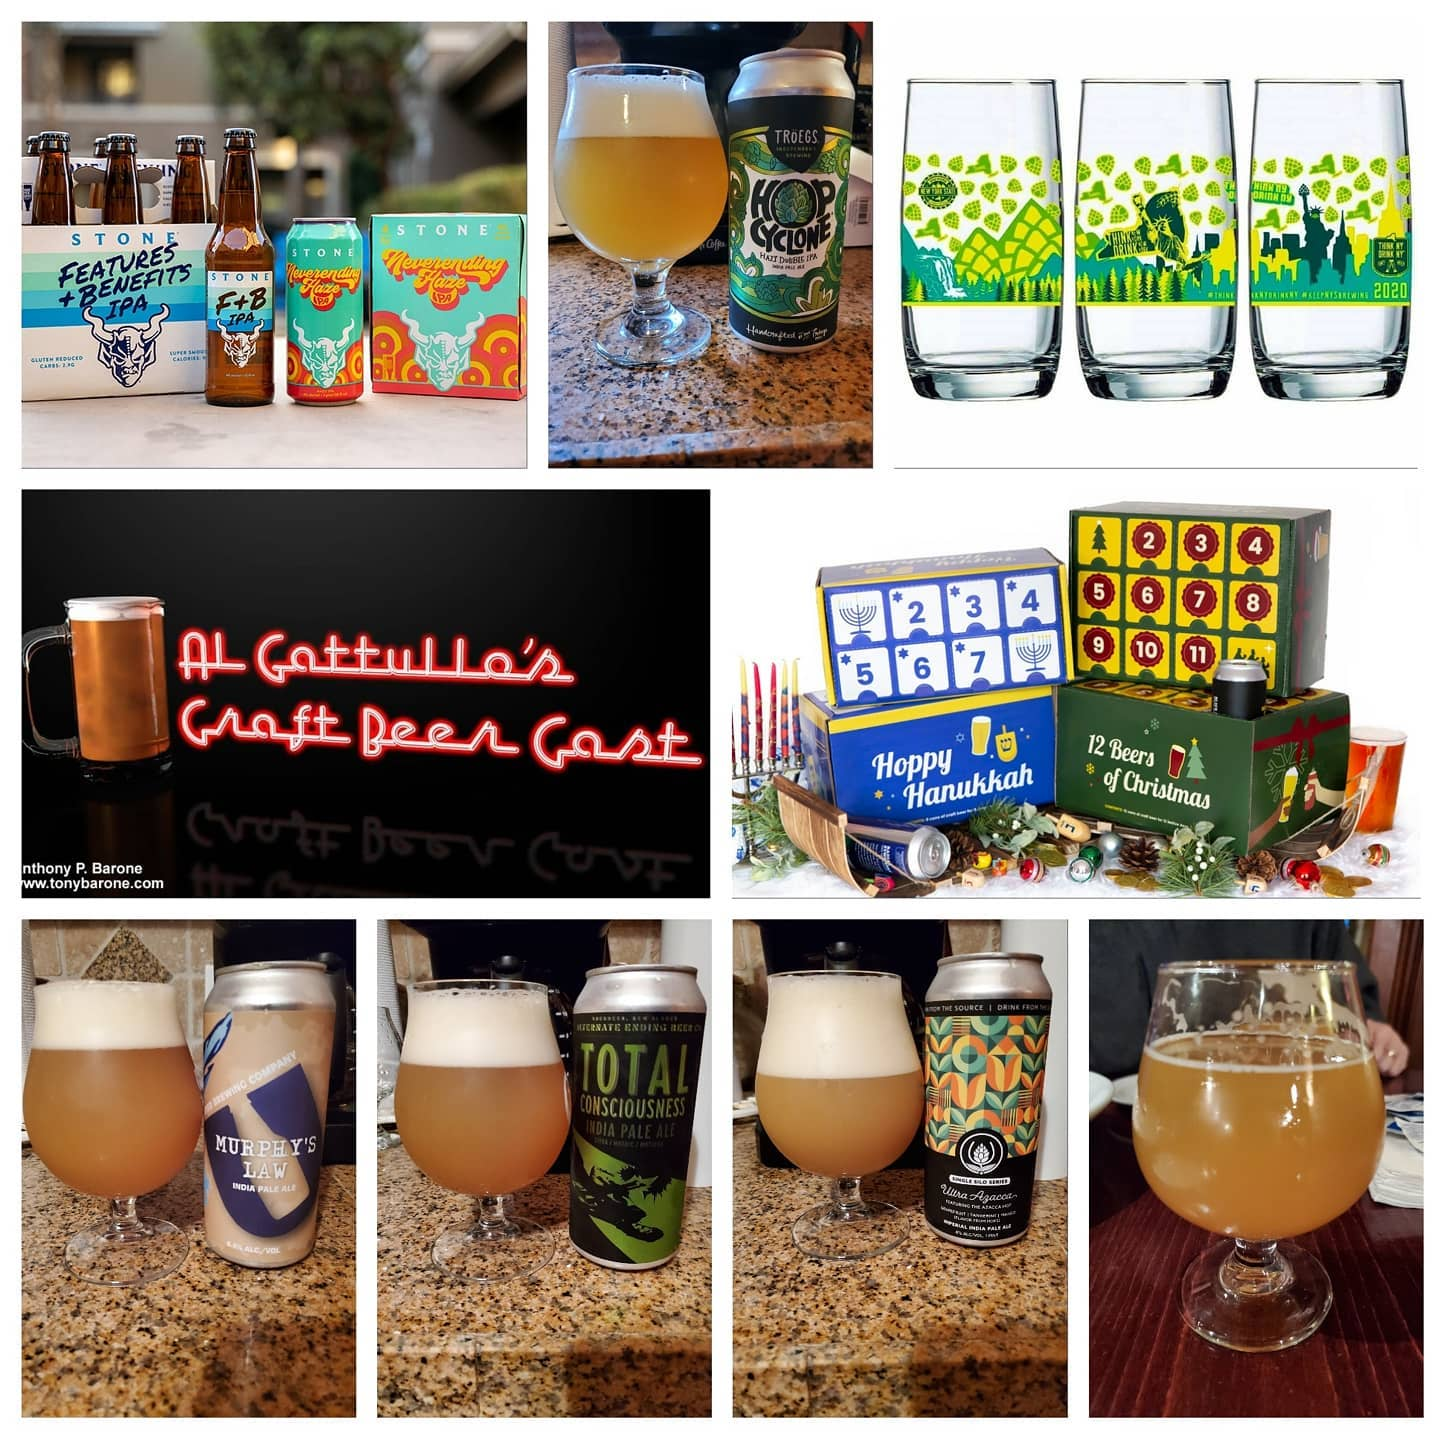 AG Craft Beer Cast 11-15-20 City Brew Tours Chad Brodsky